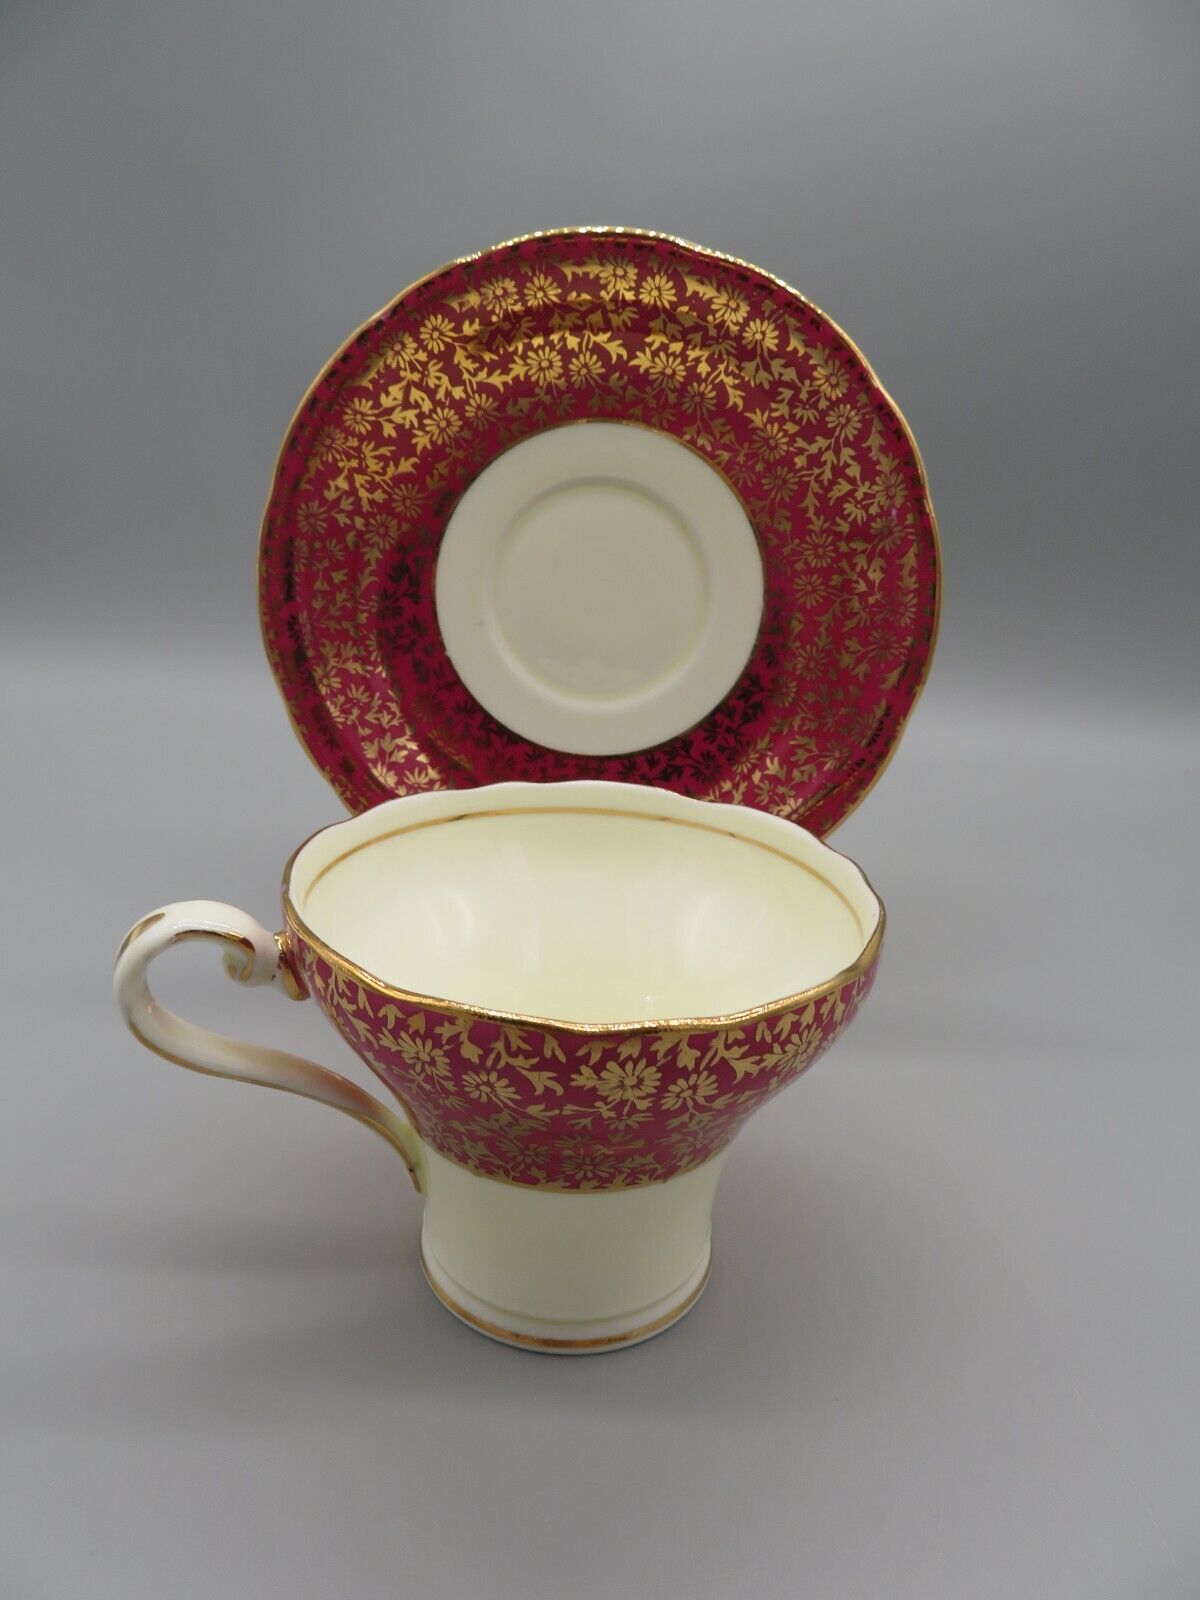 Aynsley England Bone China Teacup and Saucer Dark Pink Gold Trim w/Stand